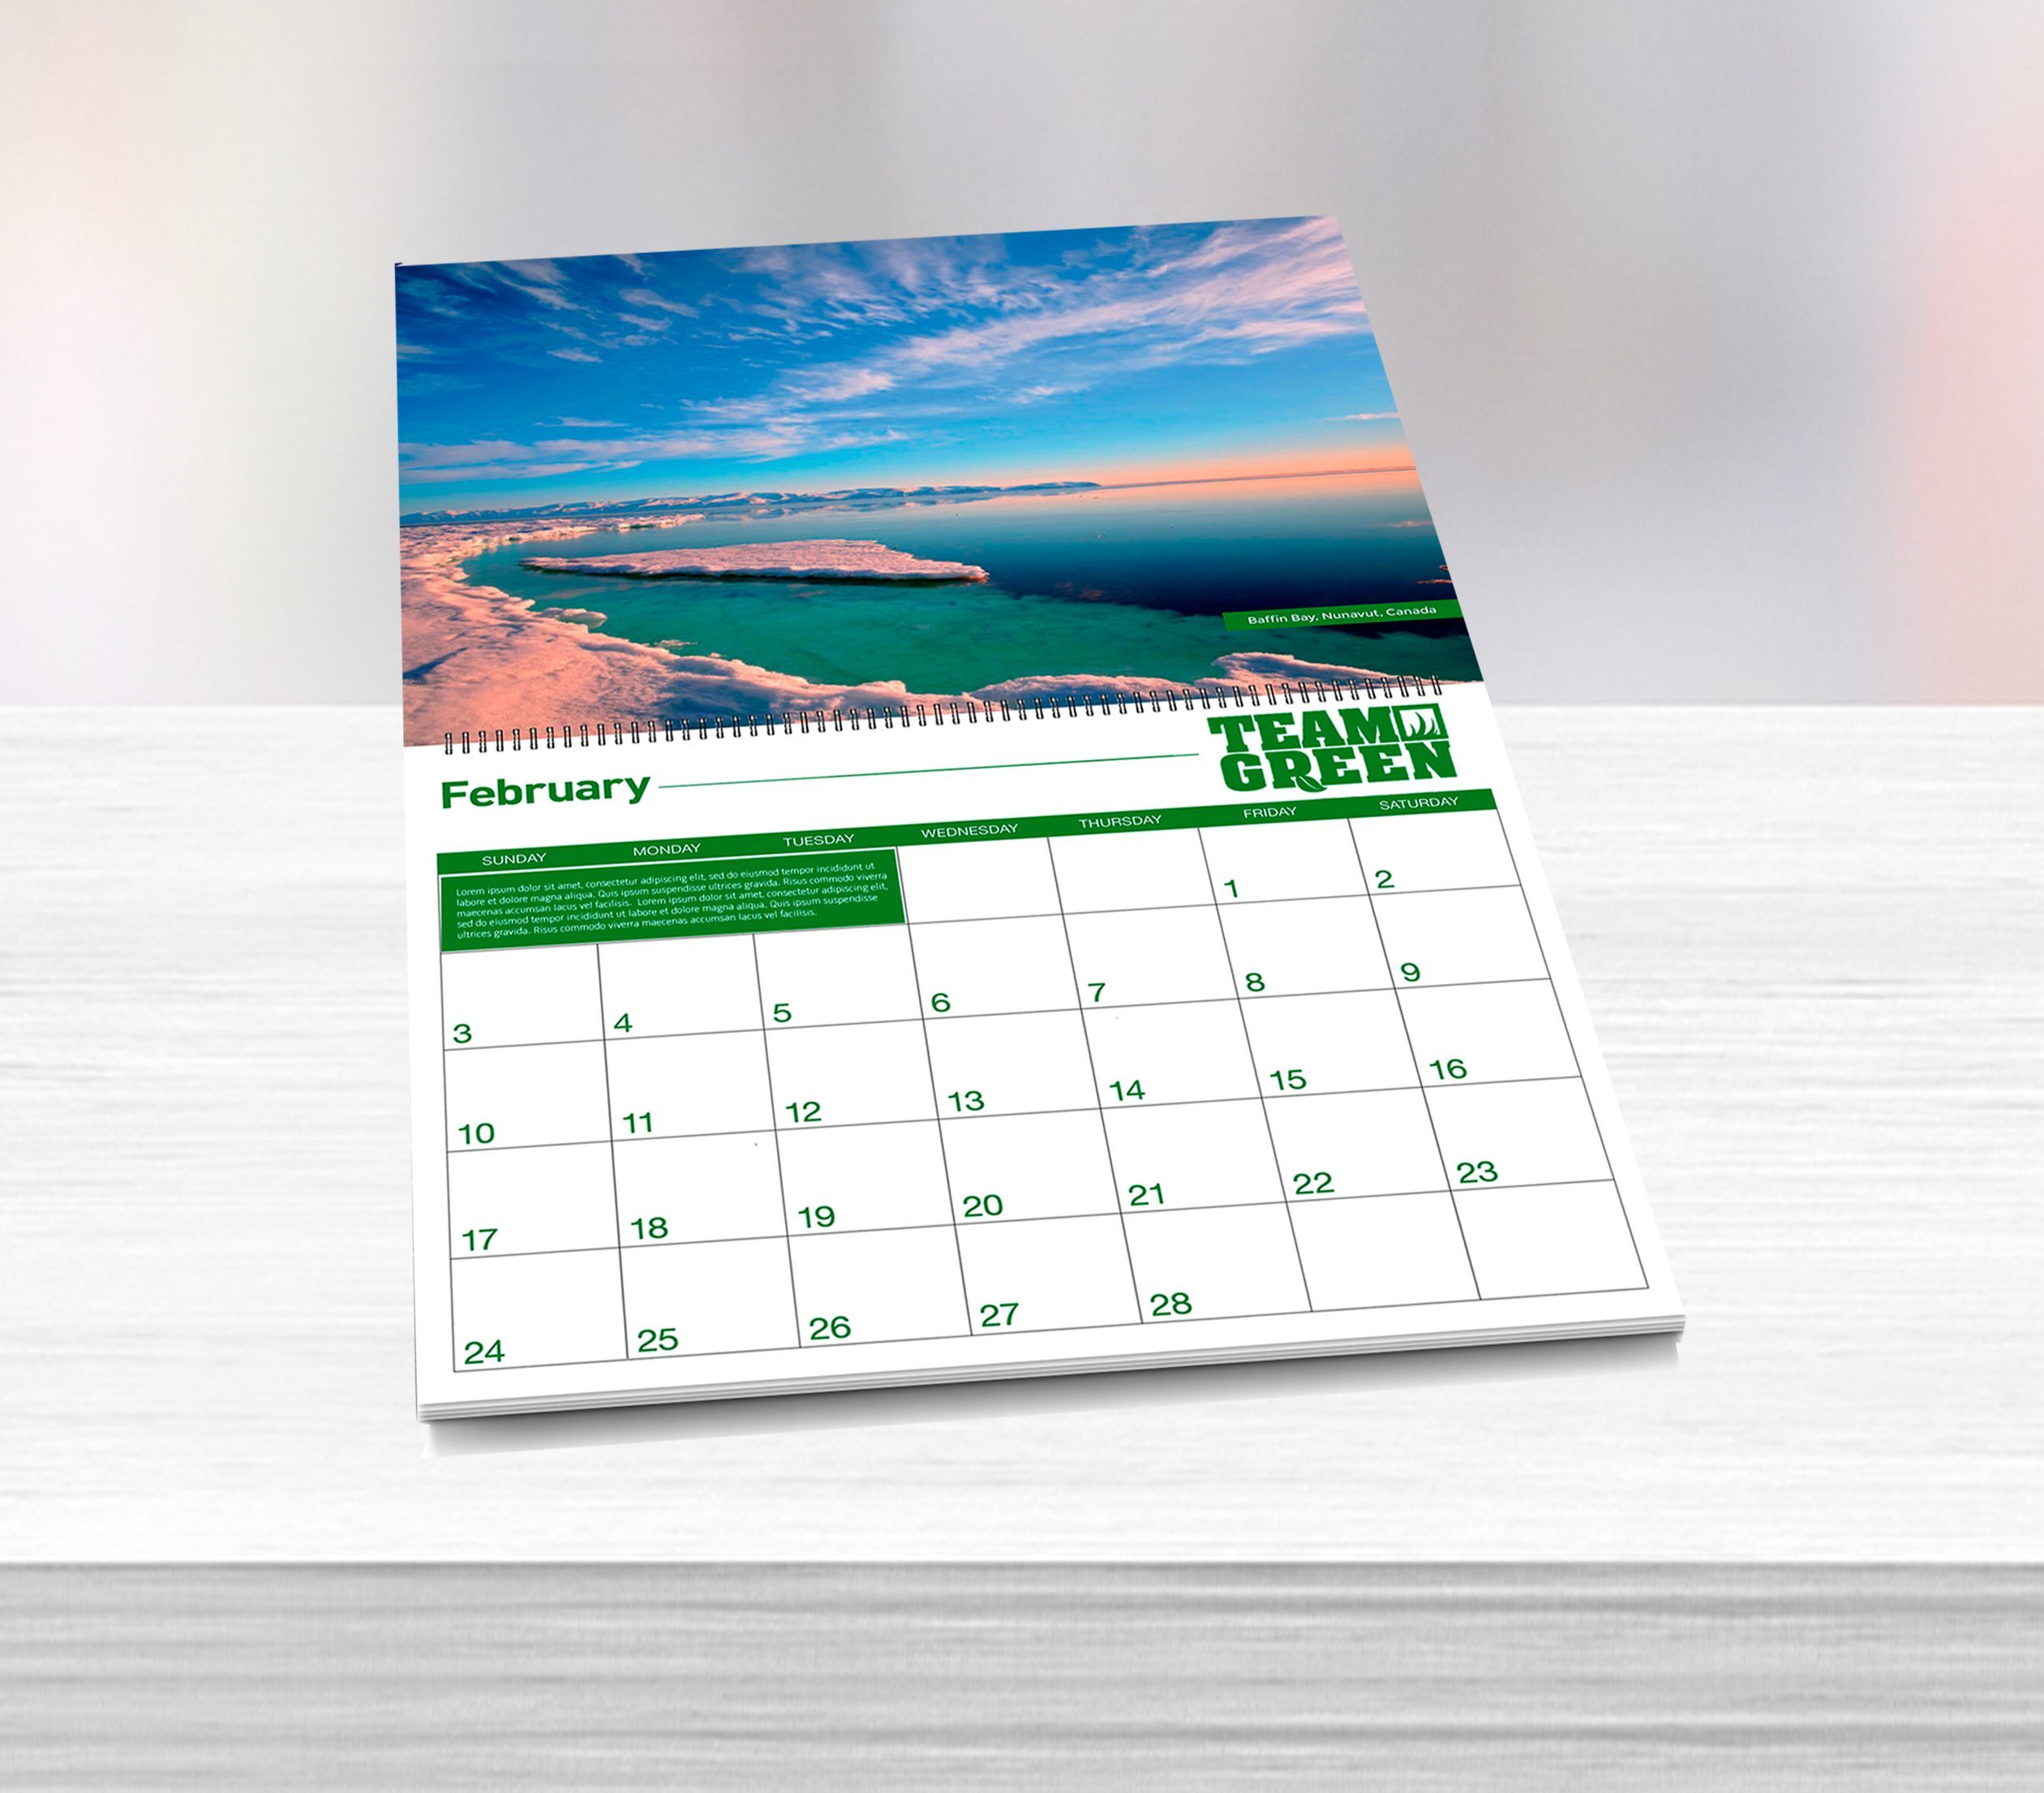 Custom Printed Calendars To Promote Your Business